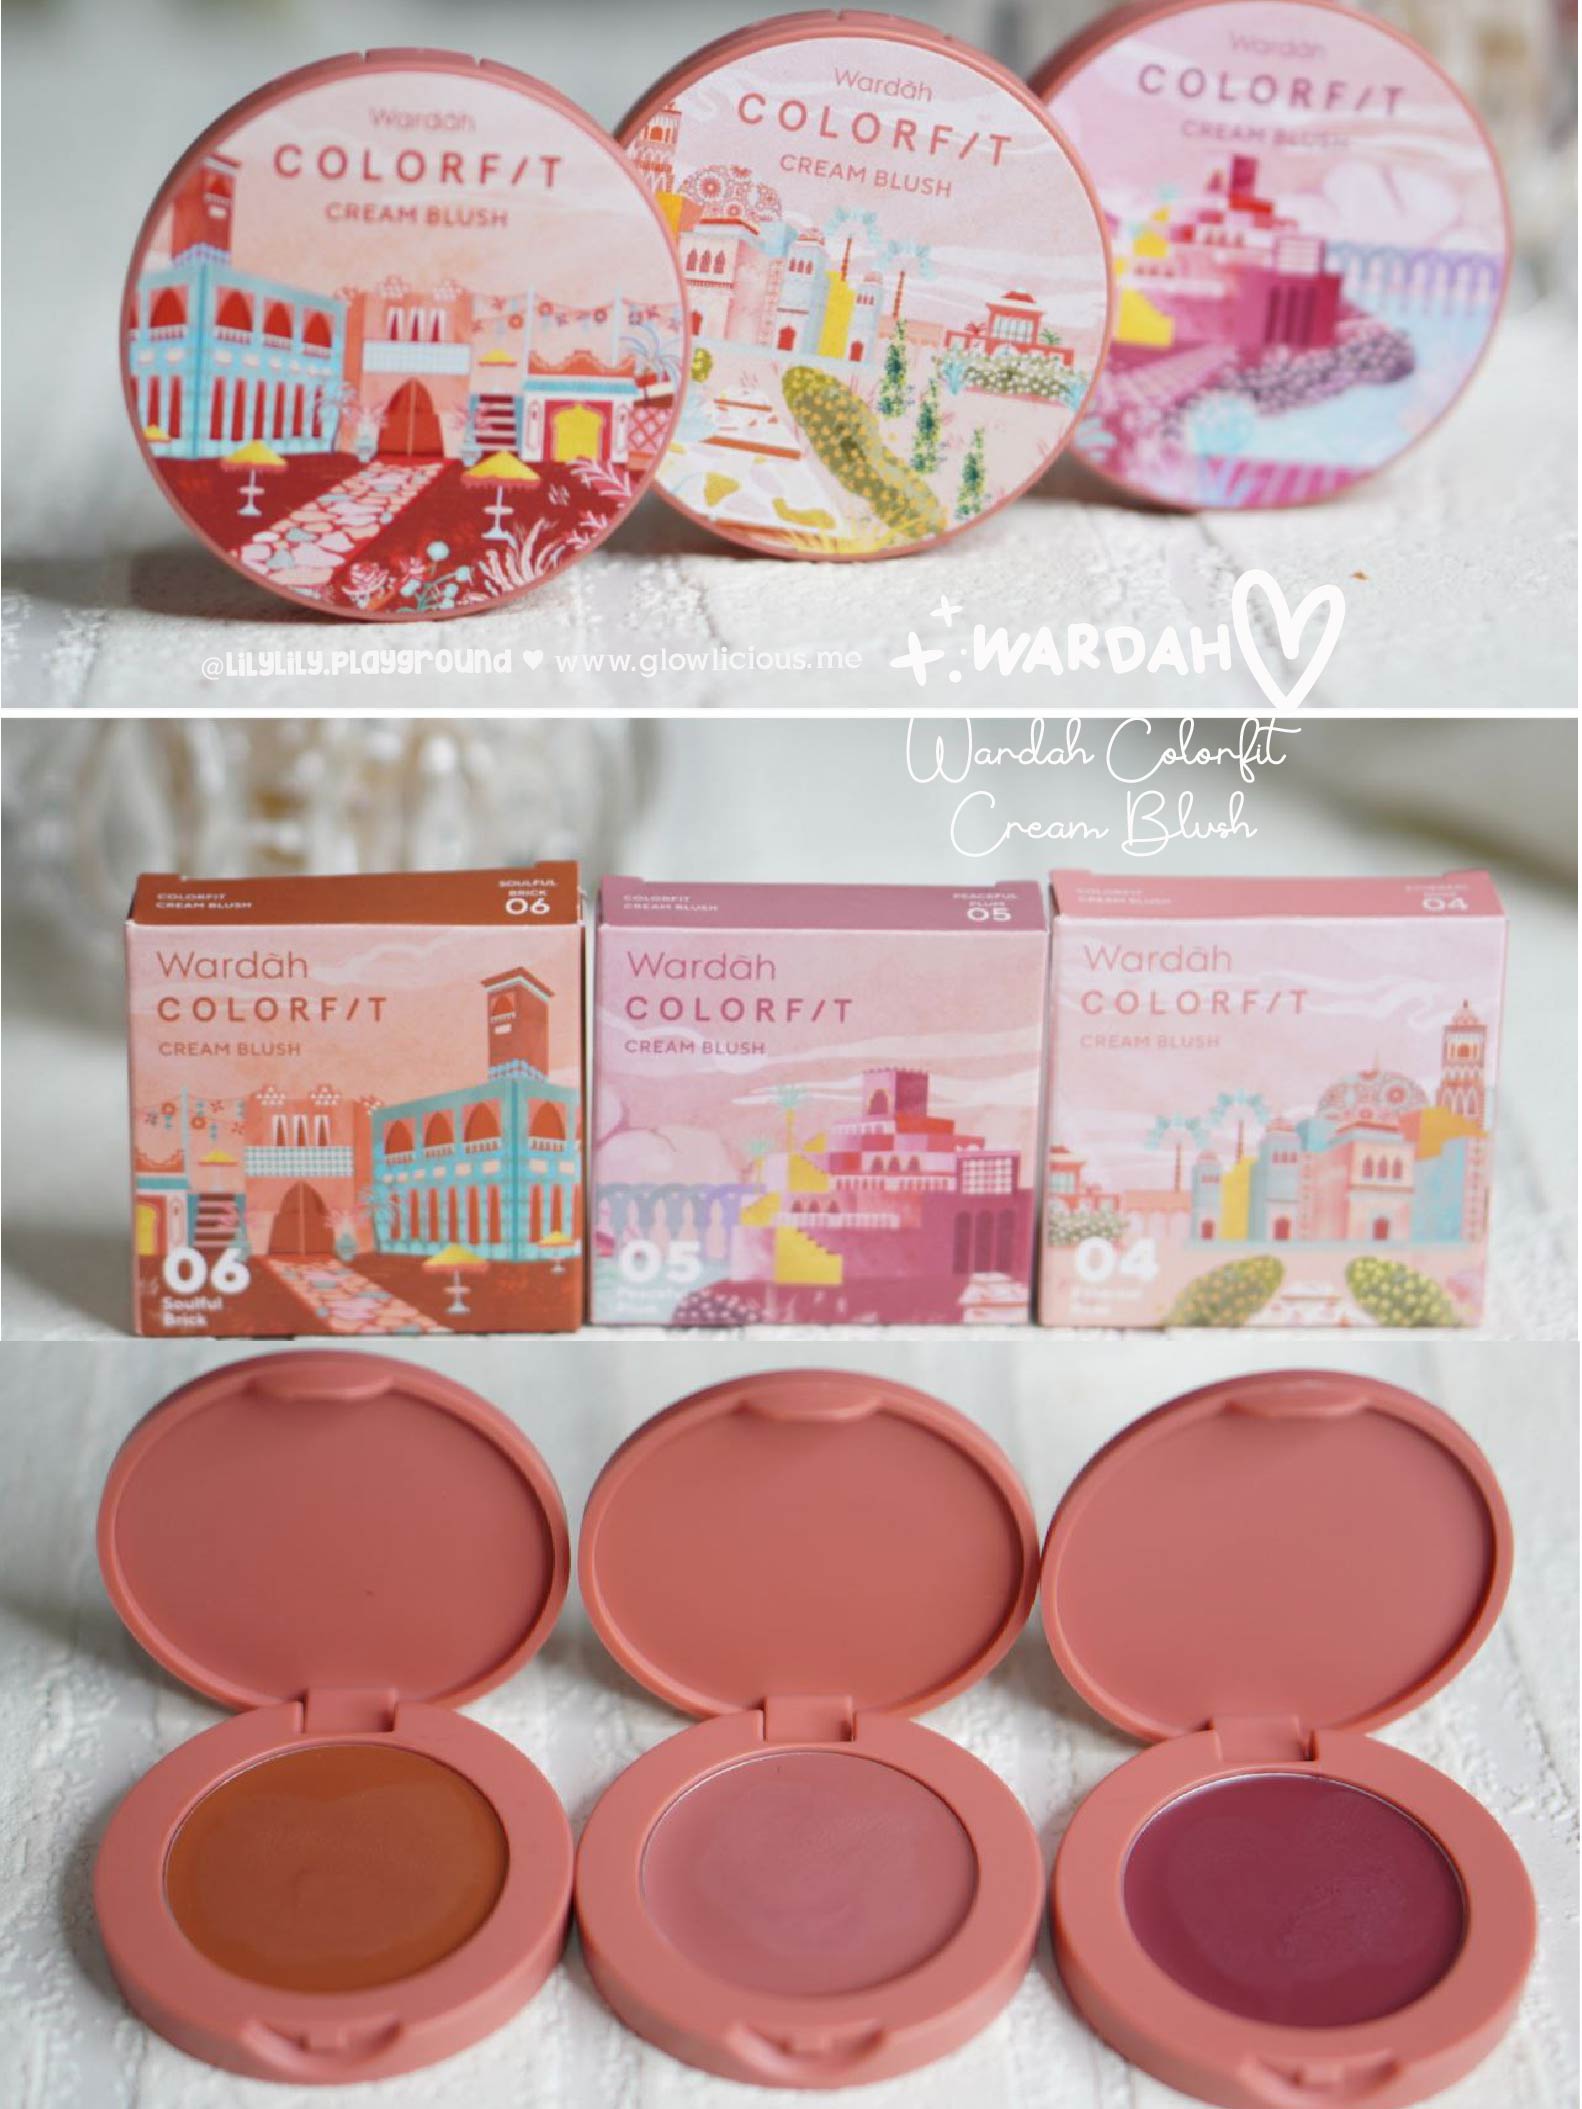 Wardah Colorfit Cream Blush Review & Swatches in 04, 05,06